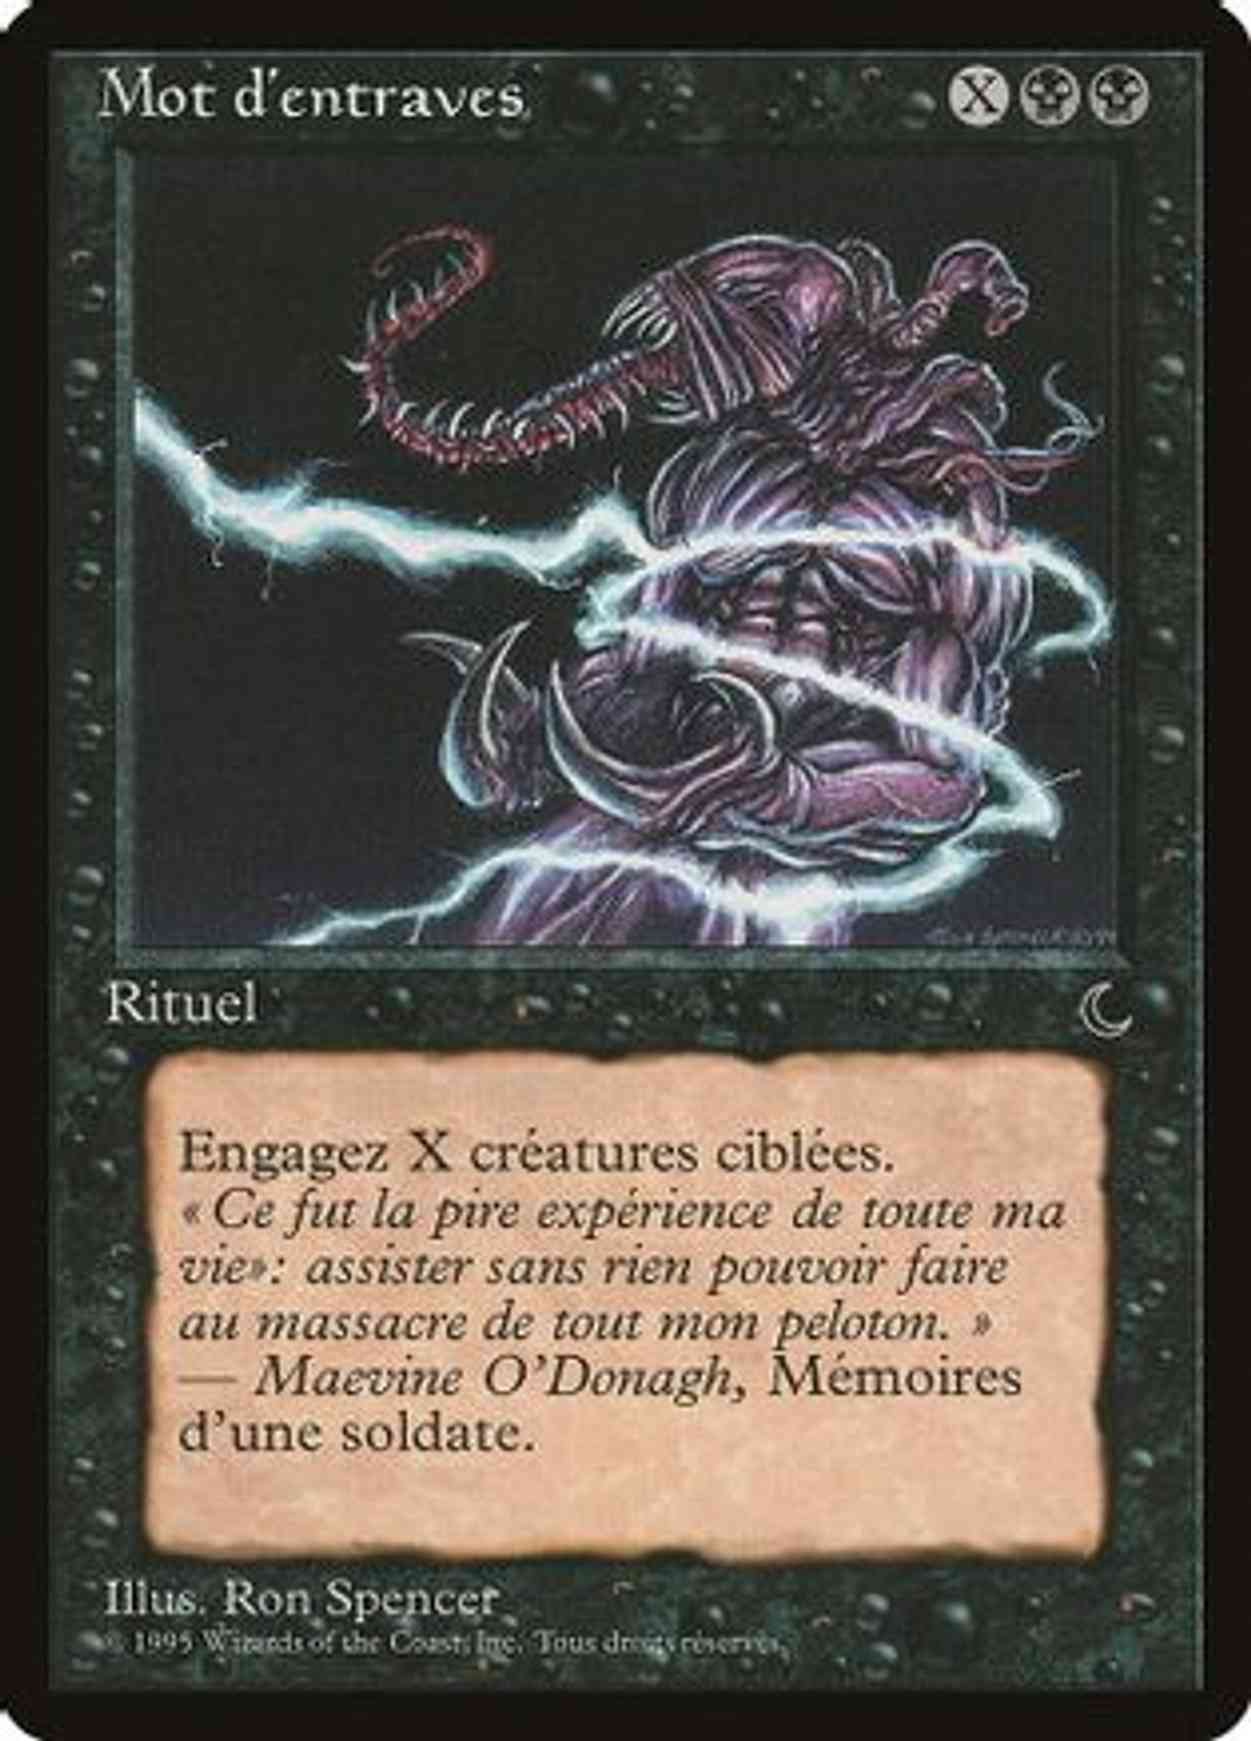 Word of Binding (French) - "Mot d'entraves" magic card front